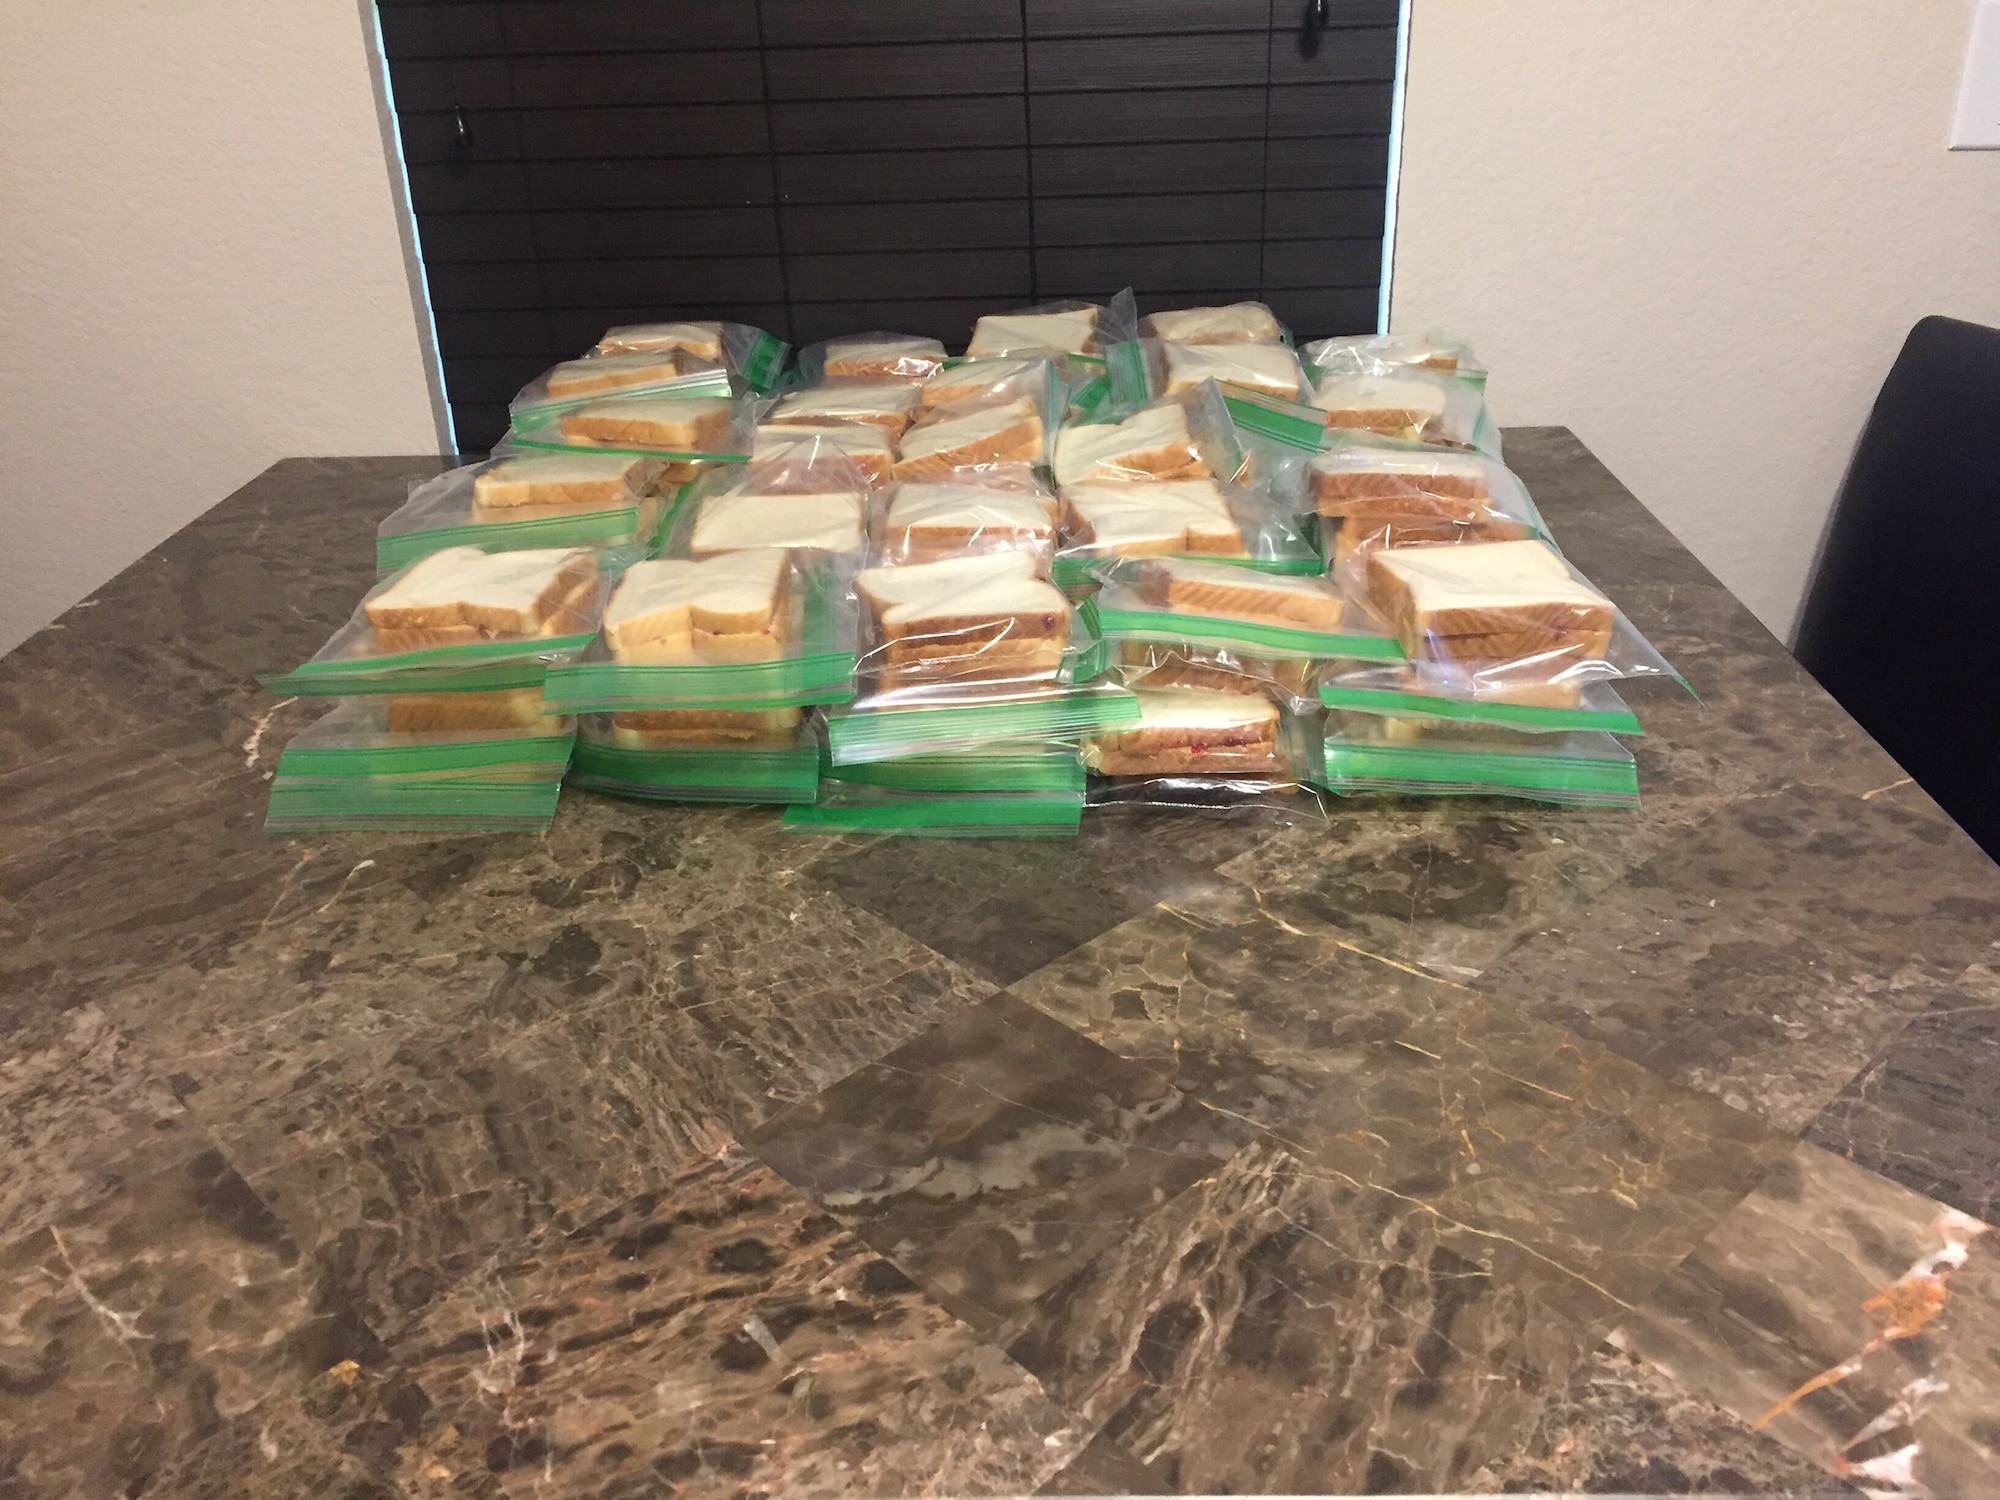 Reserve Citizen Airmen from the 23rd Intelligence Squadron donated more than 1,000 peanut butter and jelly sandwiches in the last month to local San Antonians in need.